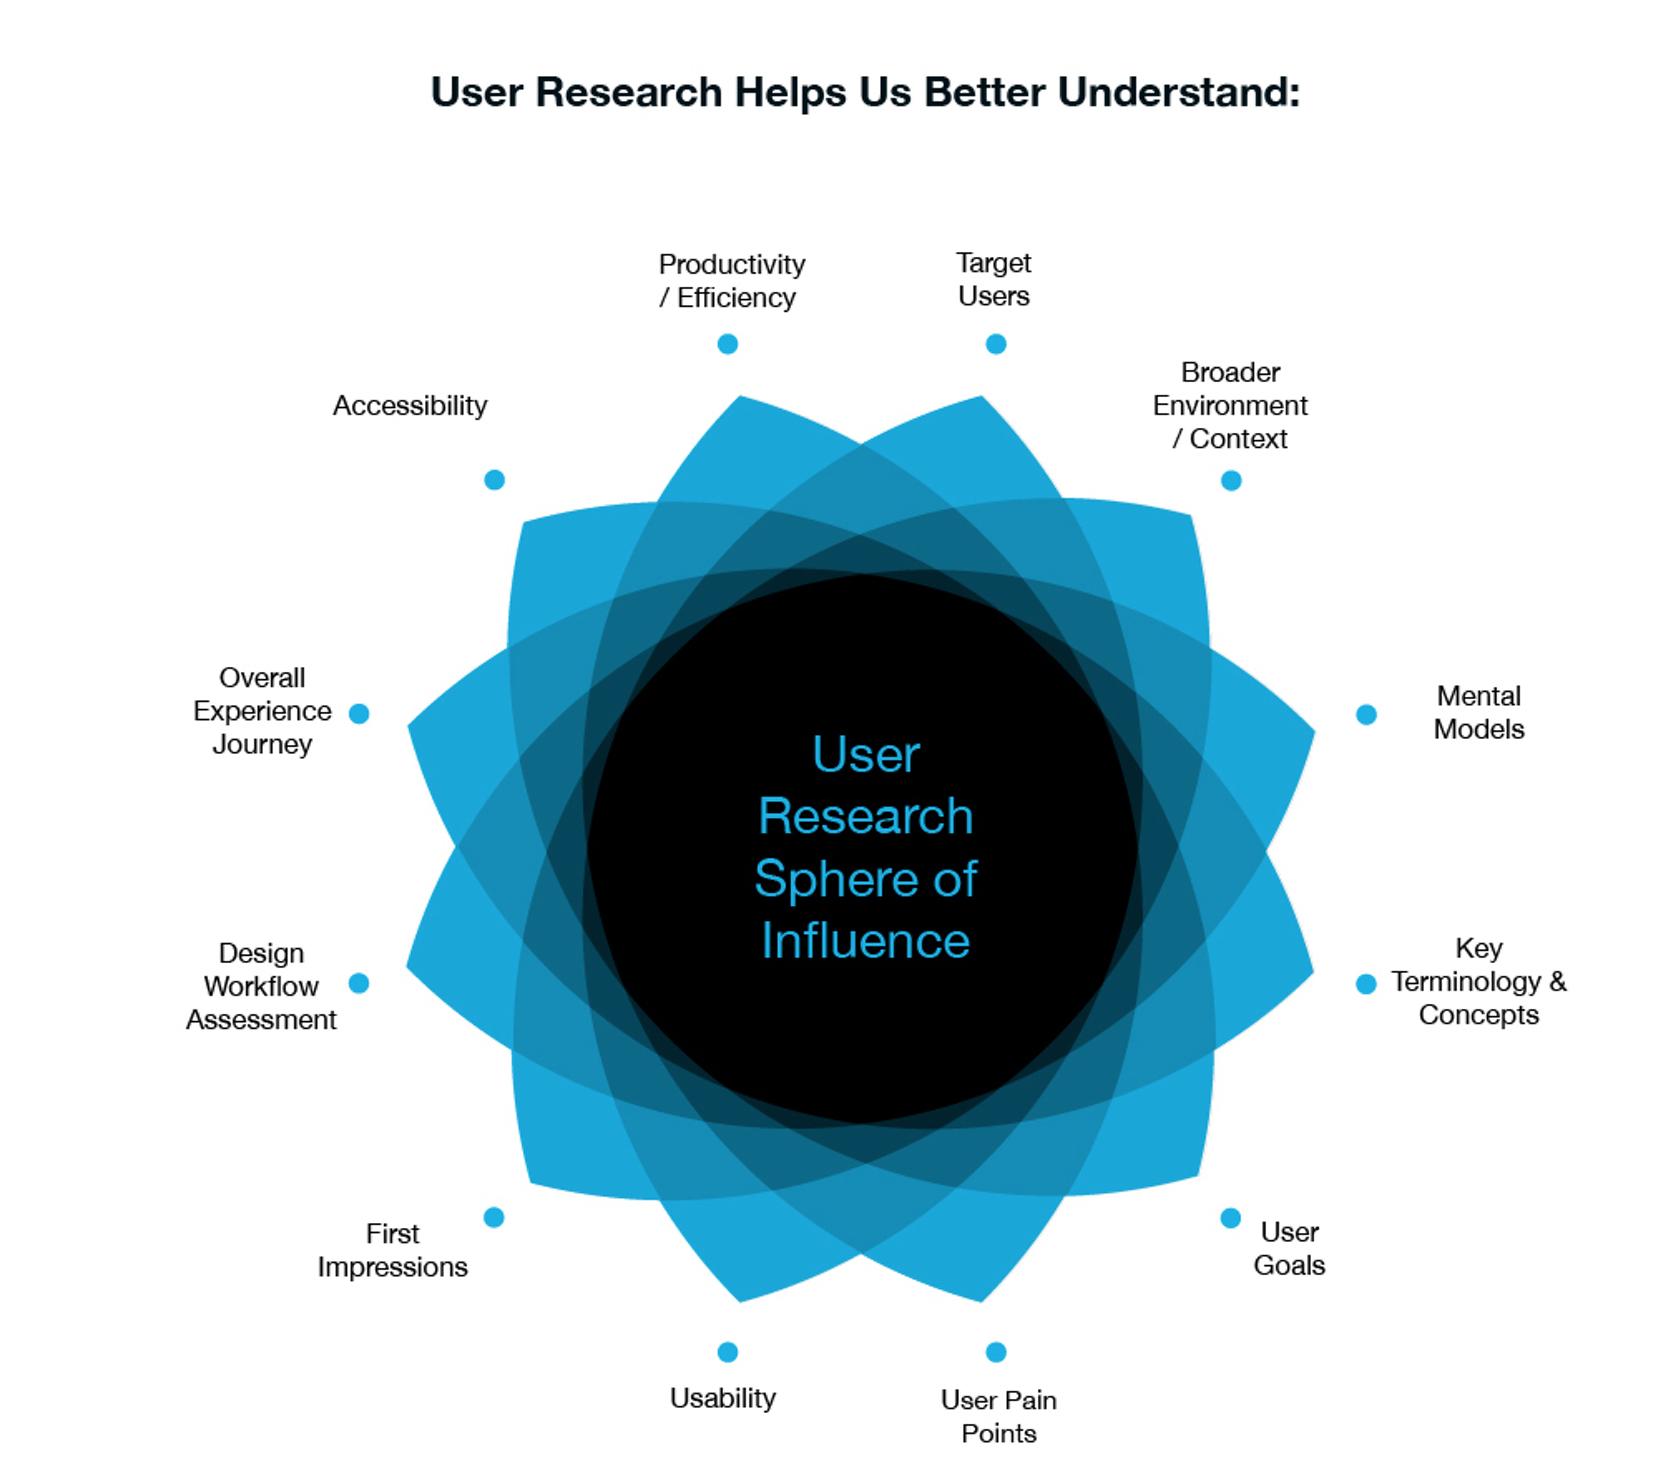 User research leads to using qualitative analysis methods to extract results.